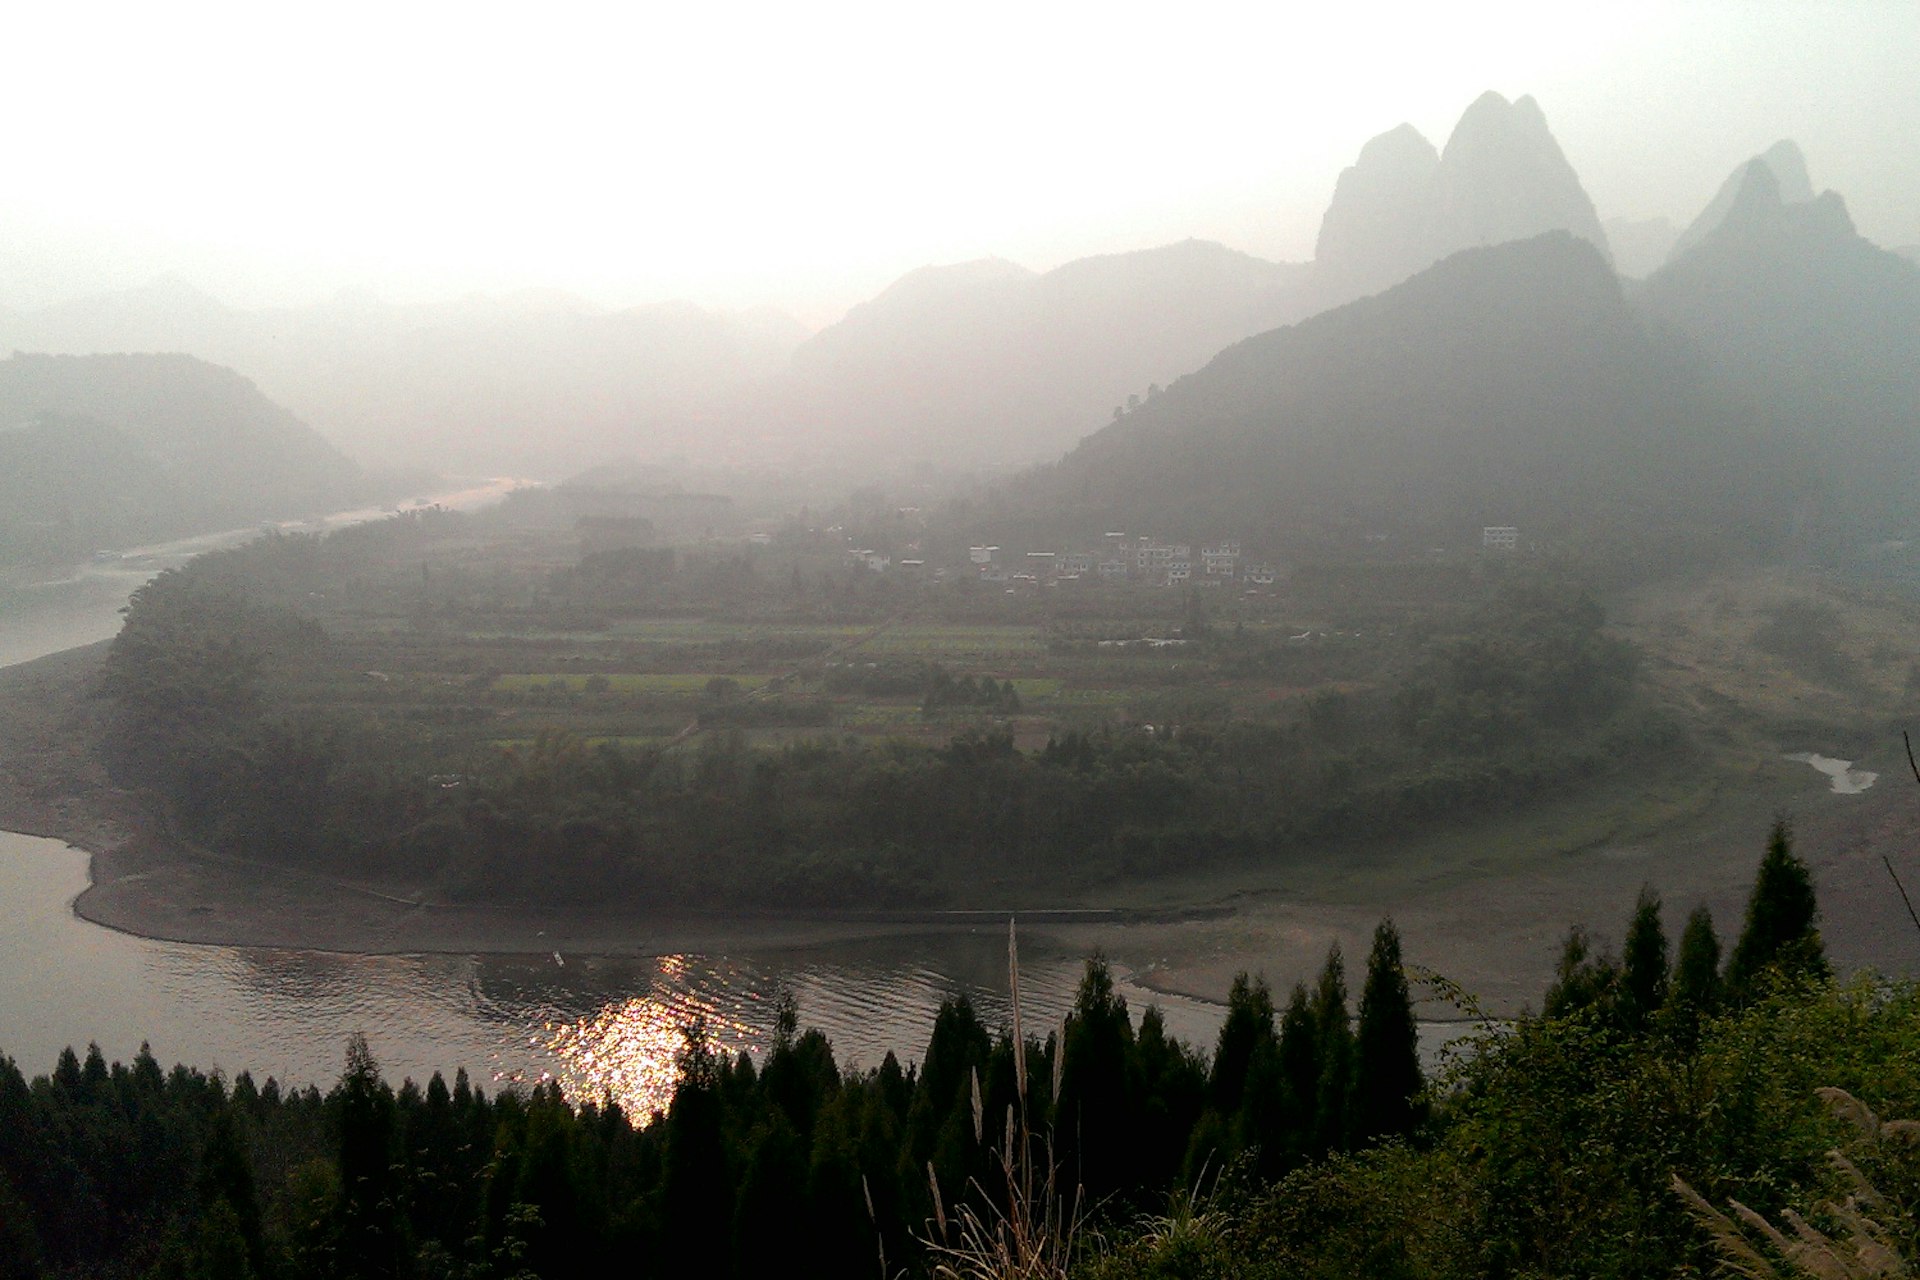 View of Li River on trail between Xingping and Fish Village. Image by Piera Chen / Lonely Planet